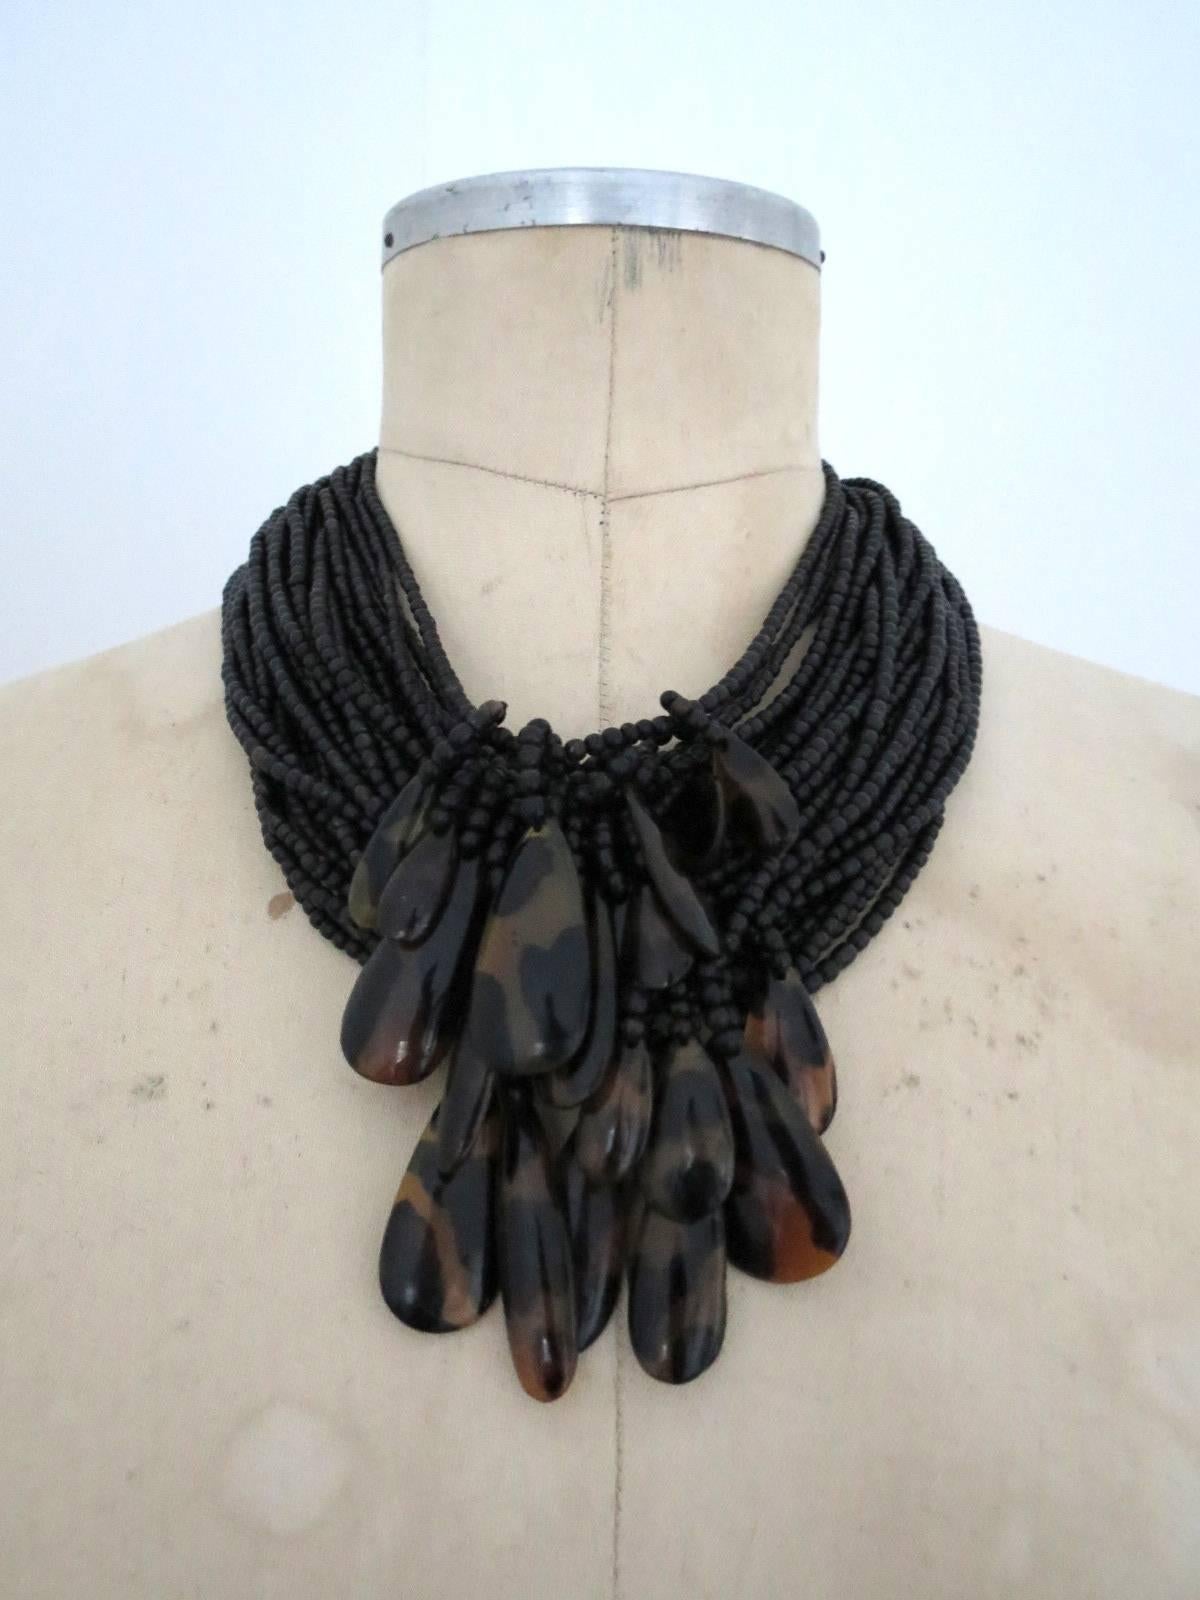 This is lovely Vintage Danish Monies necklace designed by Gerda Lynggaard .
The necklace is made of tortoise shell color horn and it is signed .
Item Specifics
Length: 50cm (approx 19.50